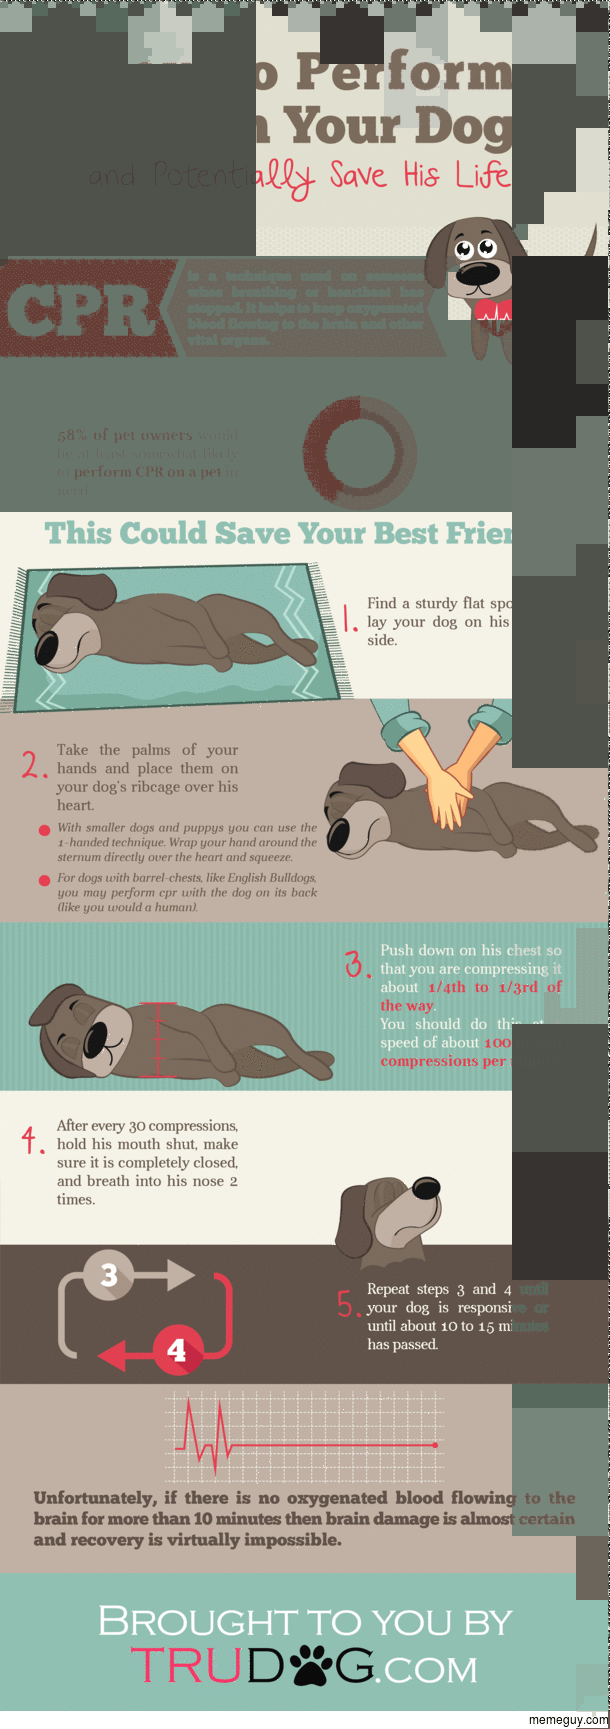 How to Perform CPR on Your Dog